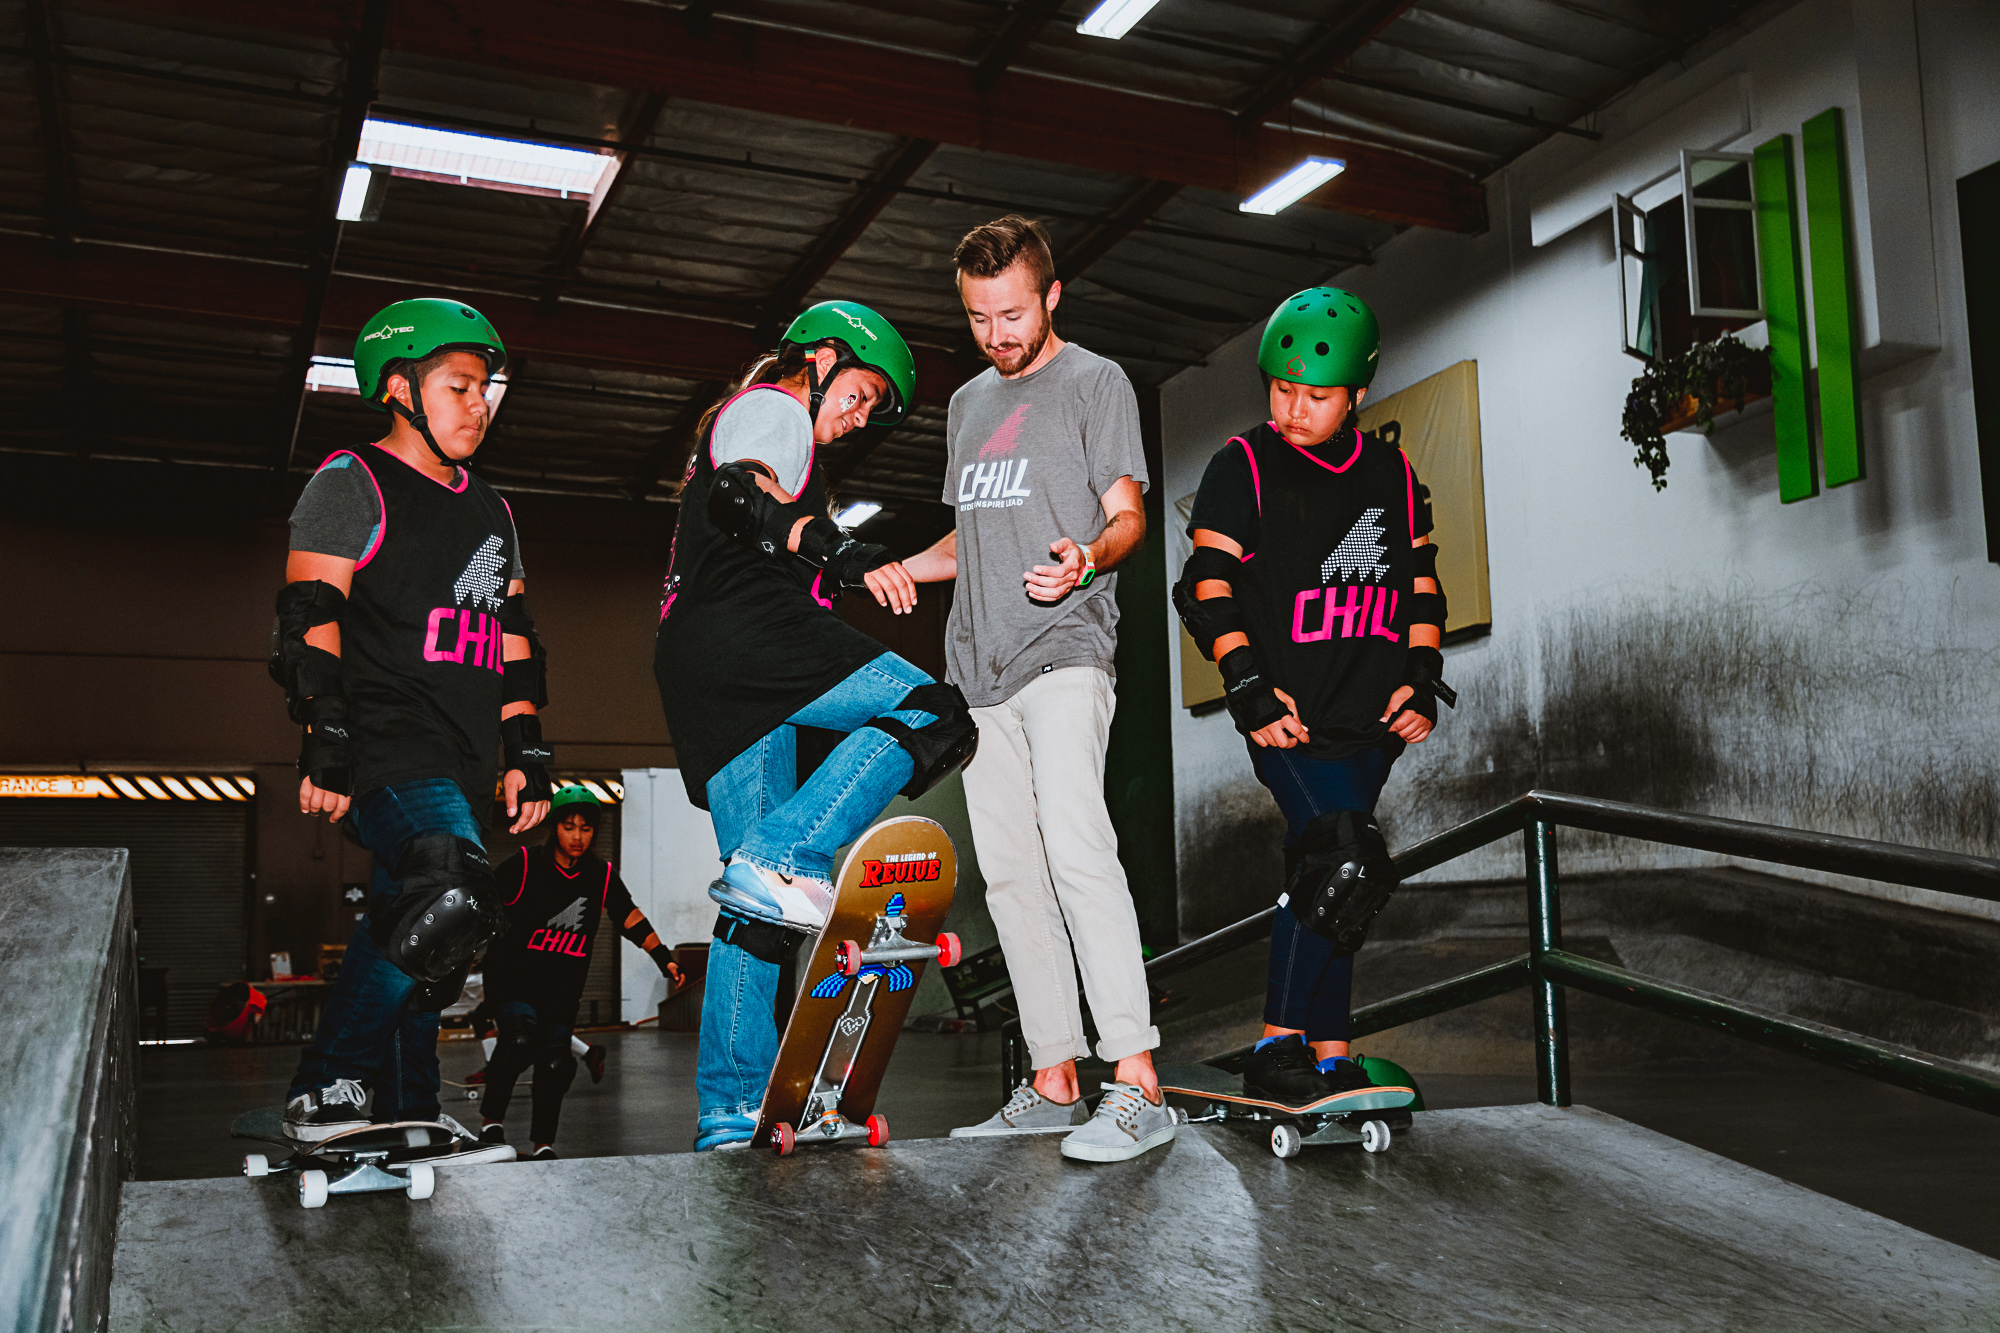 Chill Program Coordinator helps a youth drop into a ramp at the Berrics Skatepark.